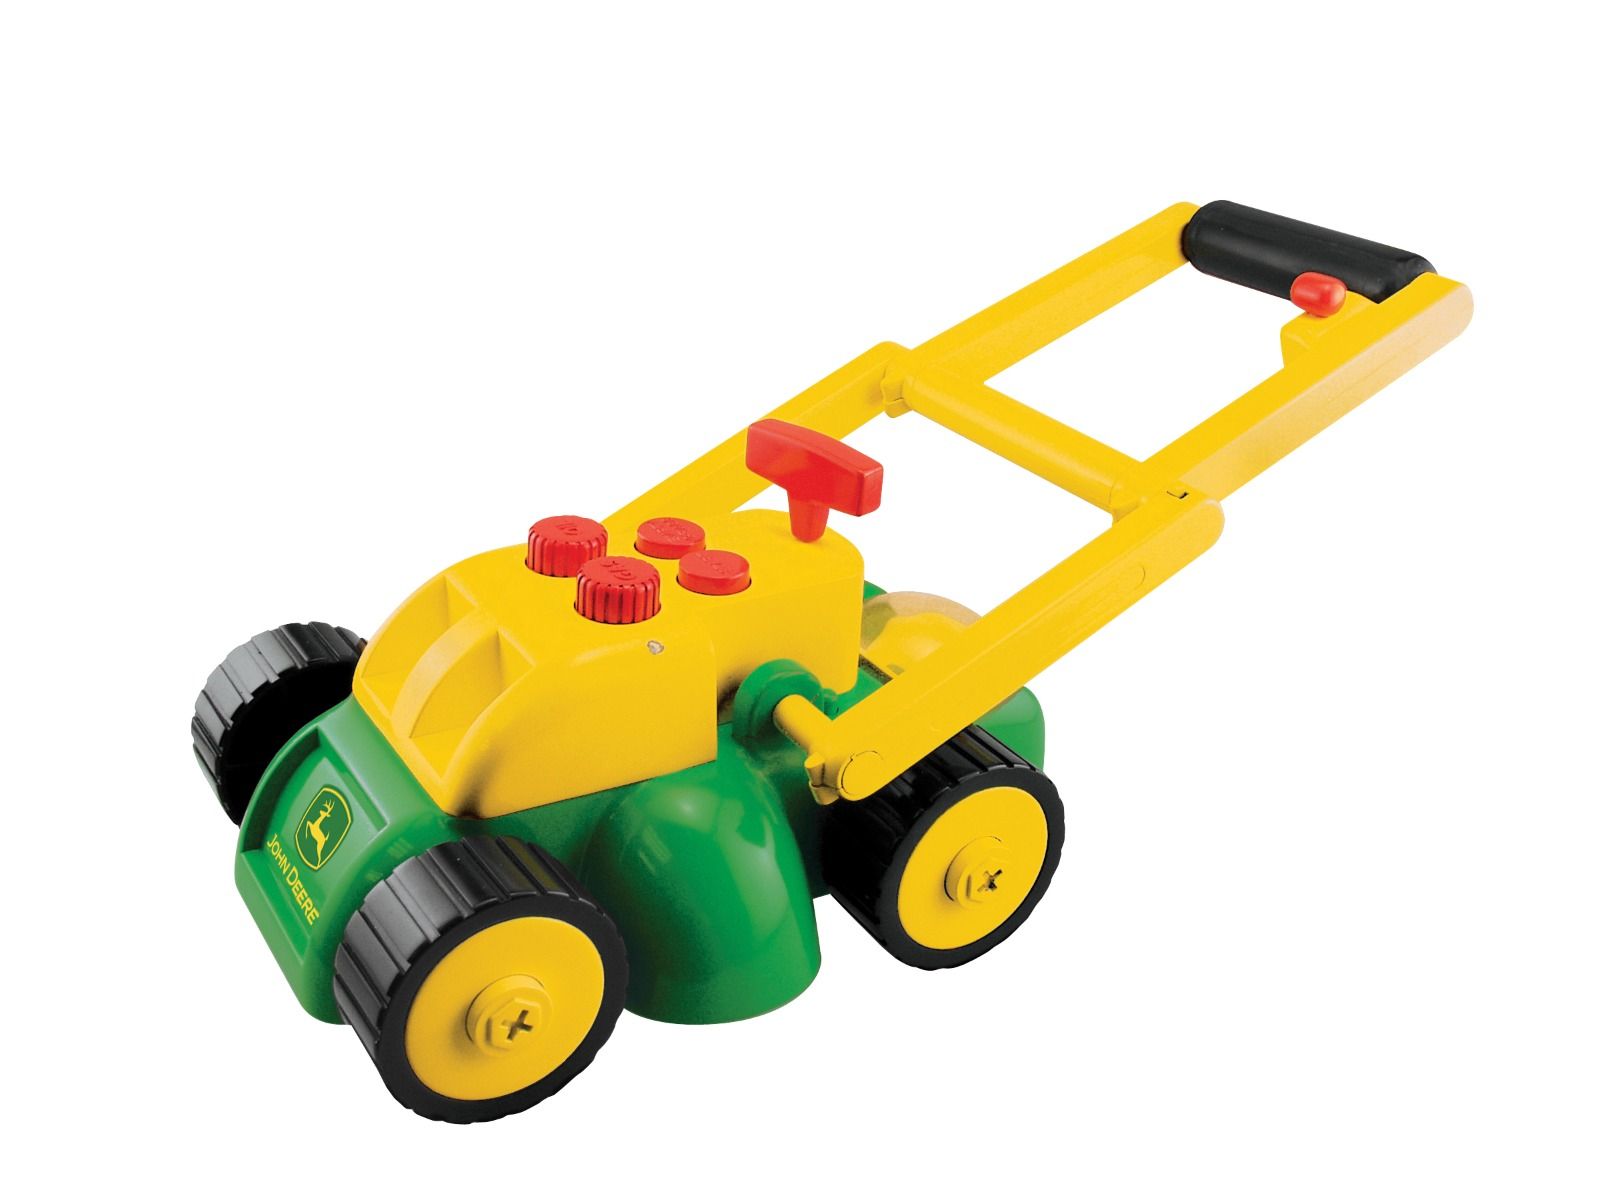 John Deere Action Lawn Mover Toy